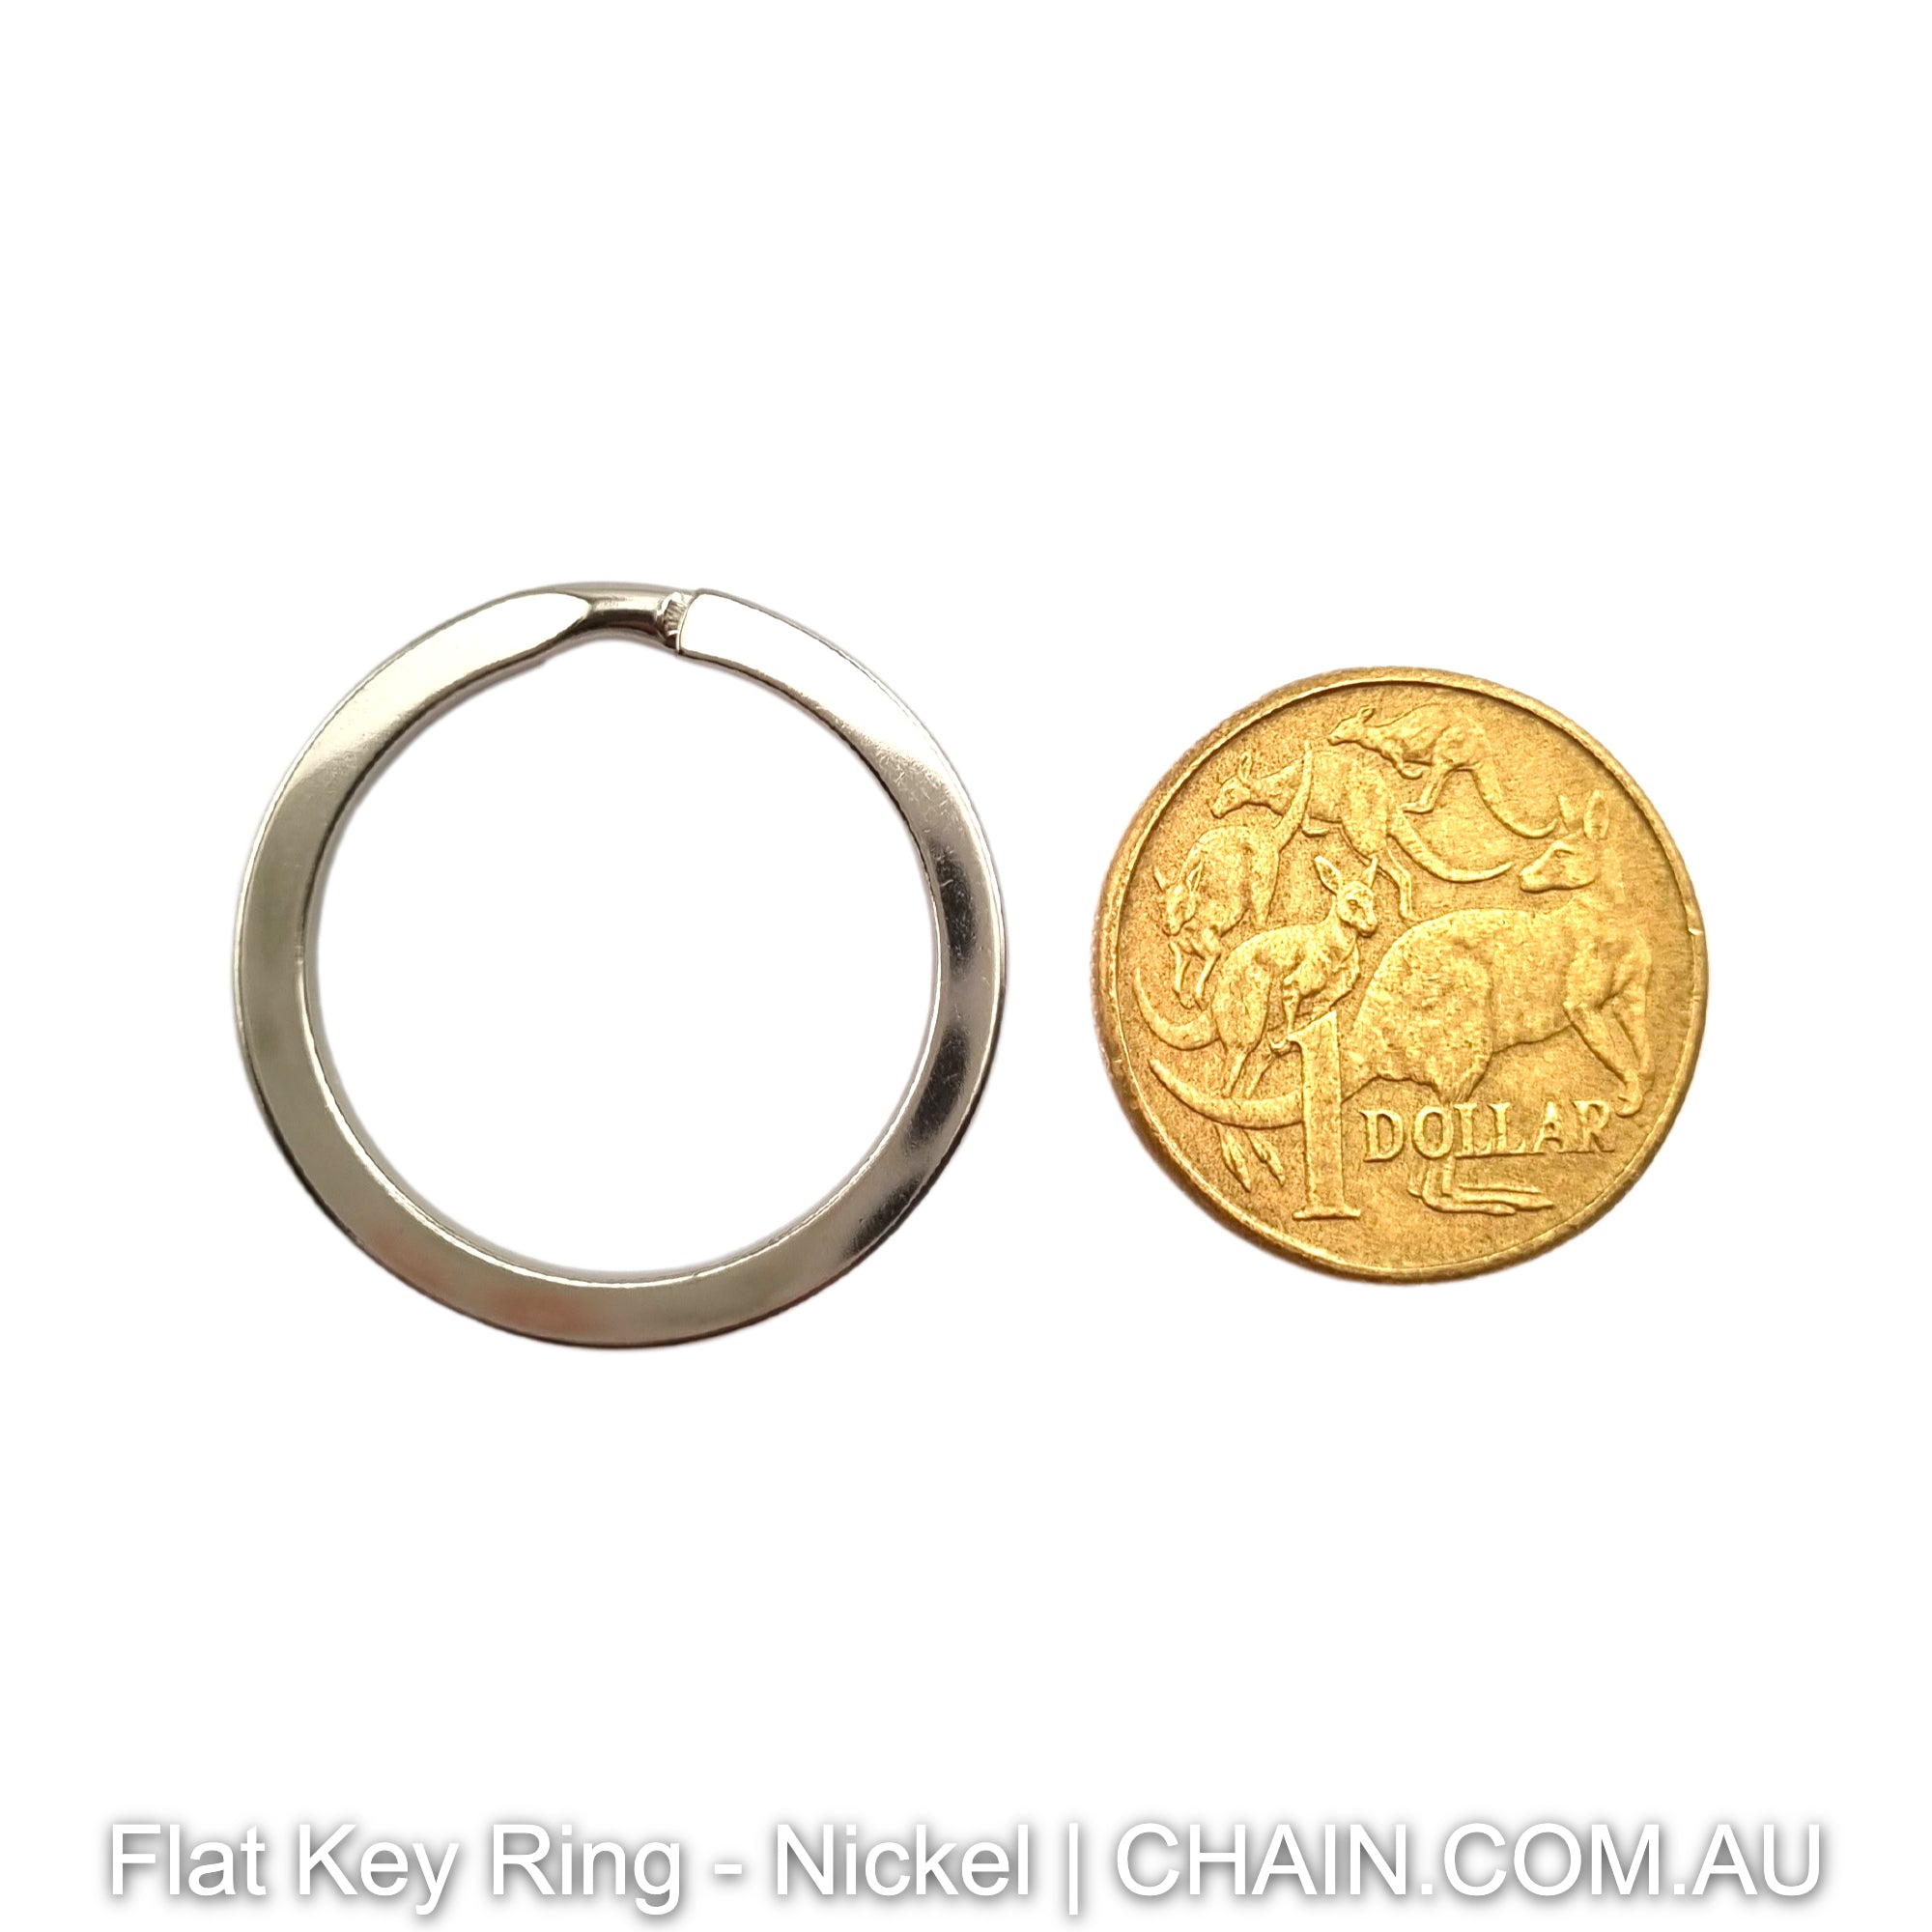 Flat Key Ring - Nickel Spring Wire. Bags of 100. Australia wide shipping. Shop chain.com.au